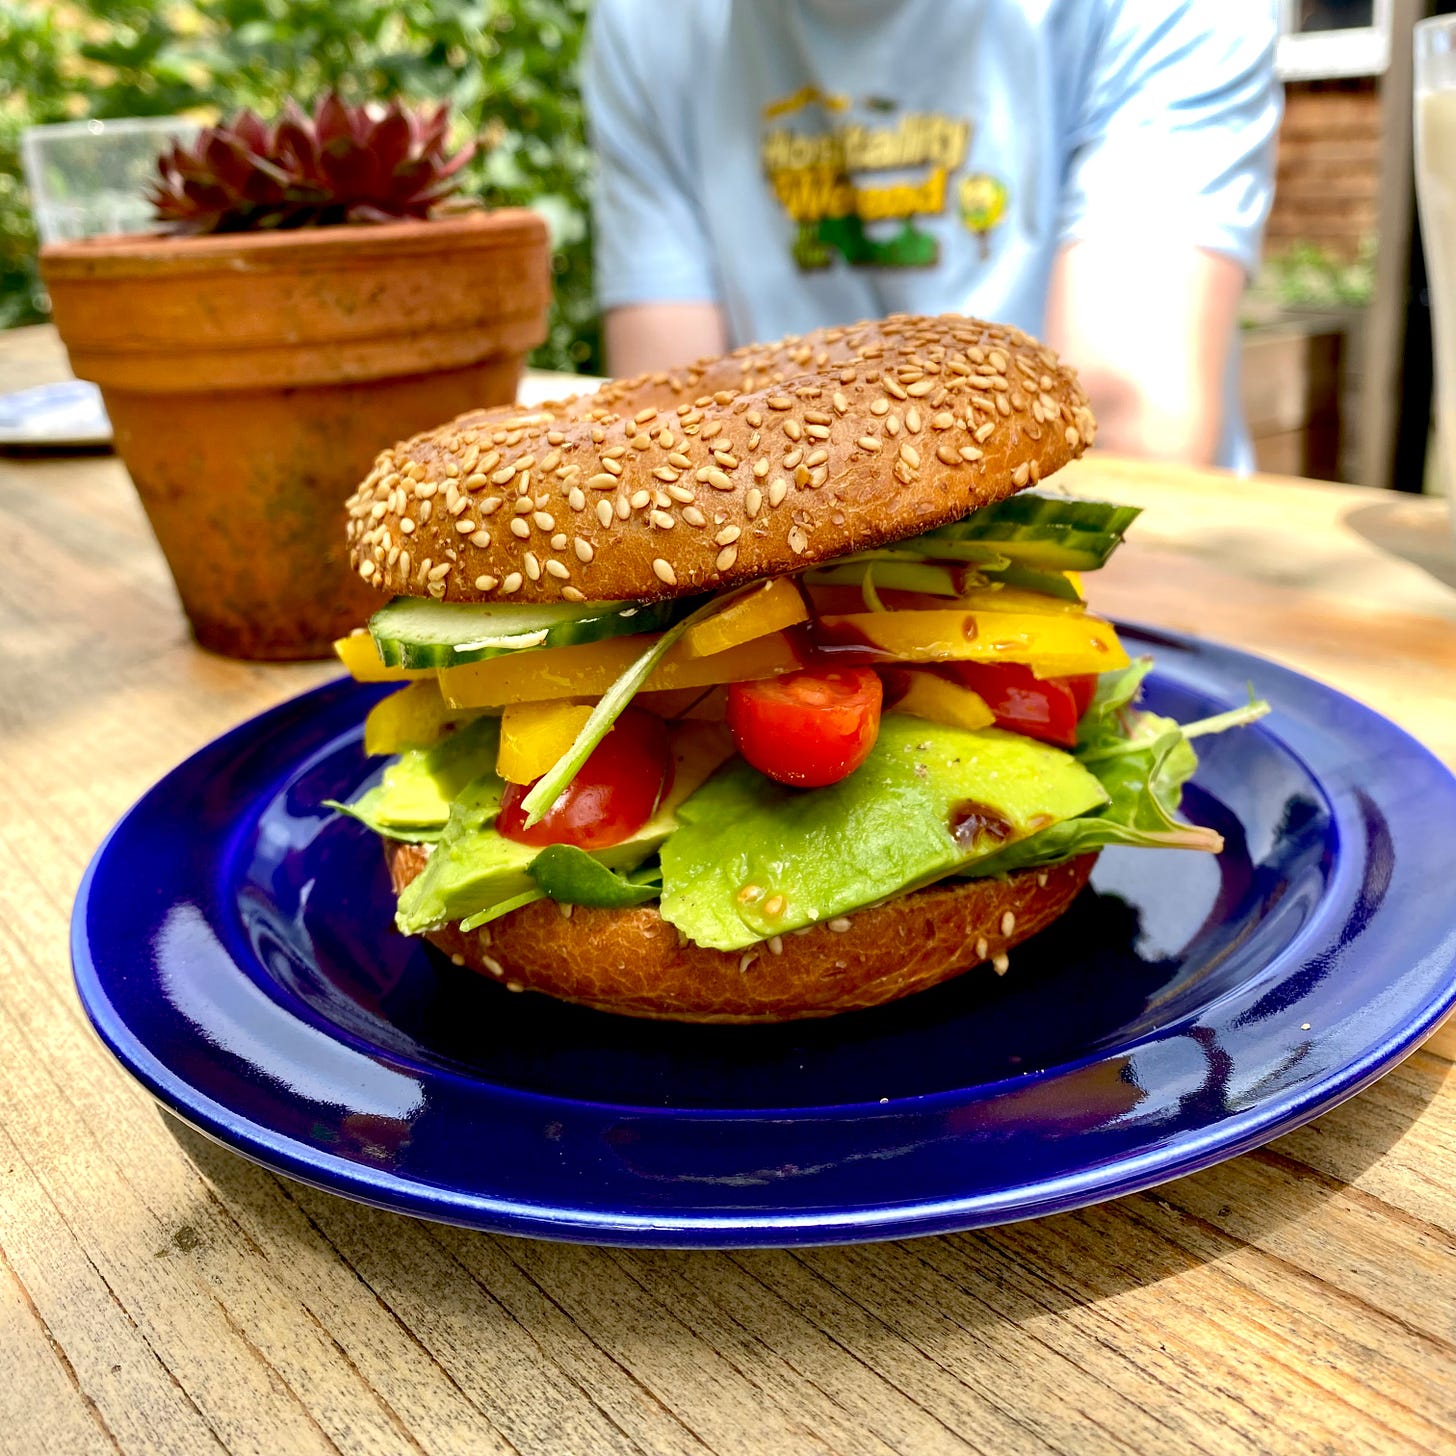 Blue plate serving a sesame seed bagel filled with salad. Outside in a garden, the plate is on a wooden table, with a sempervivum in a terracotta pot next to it.